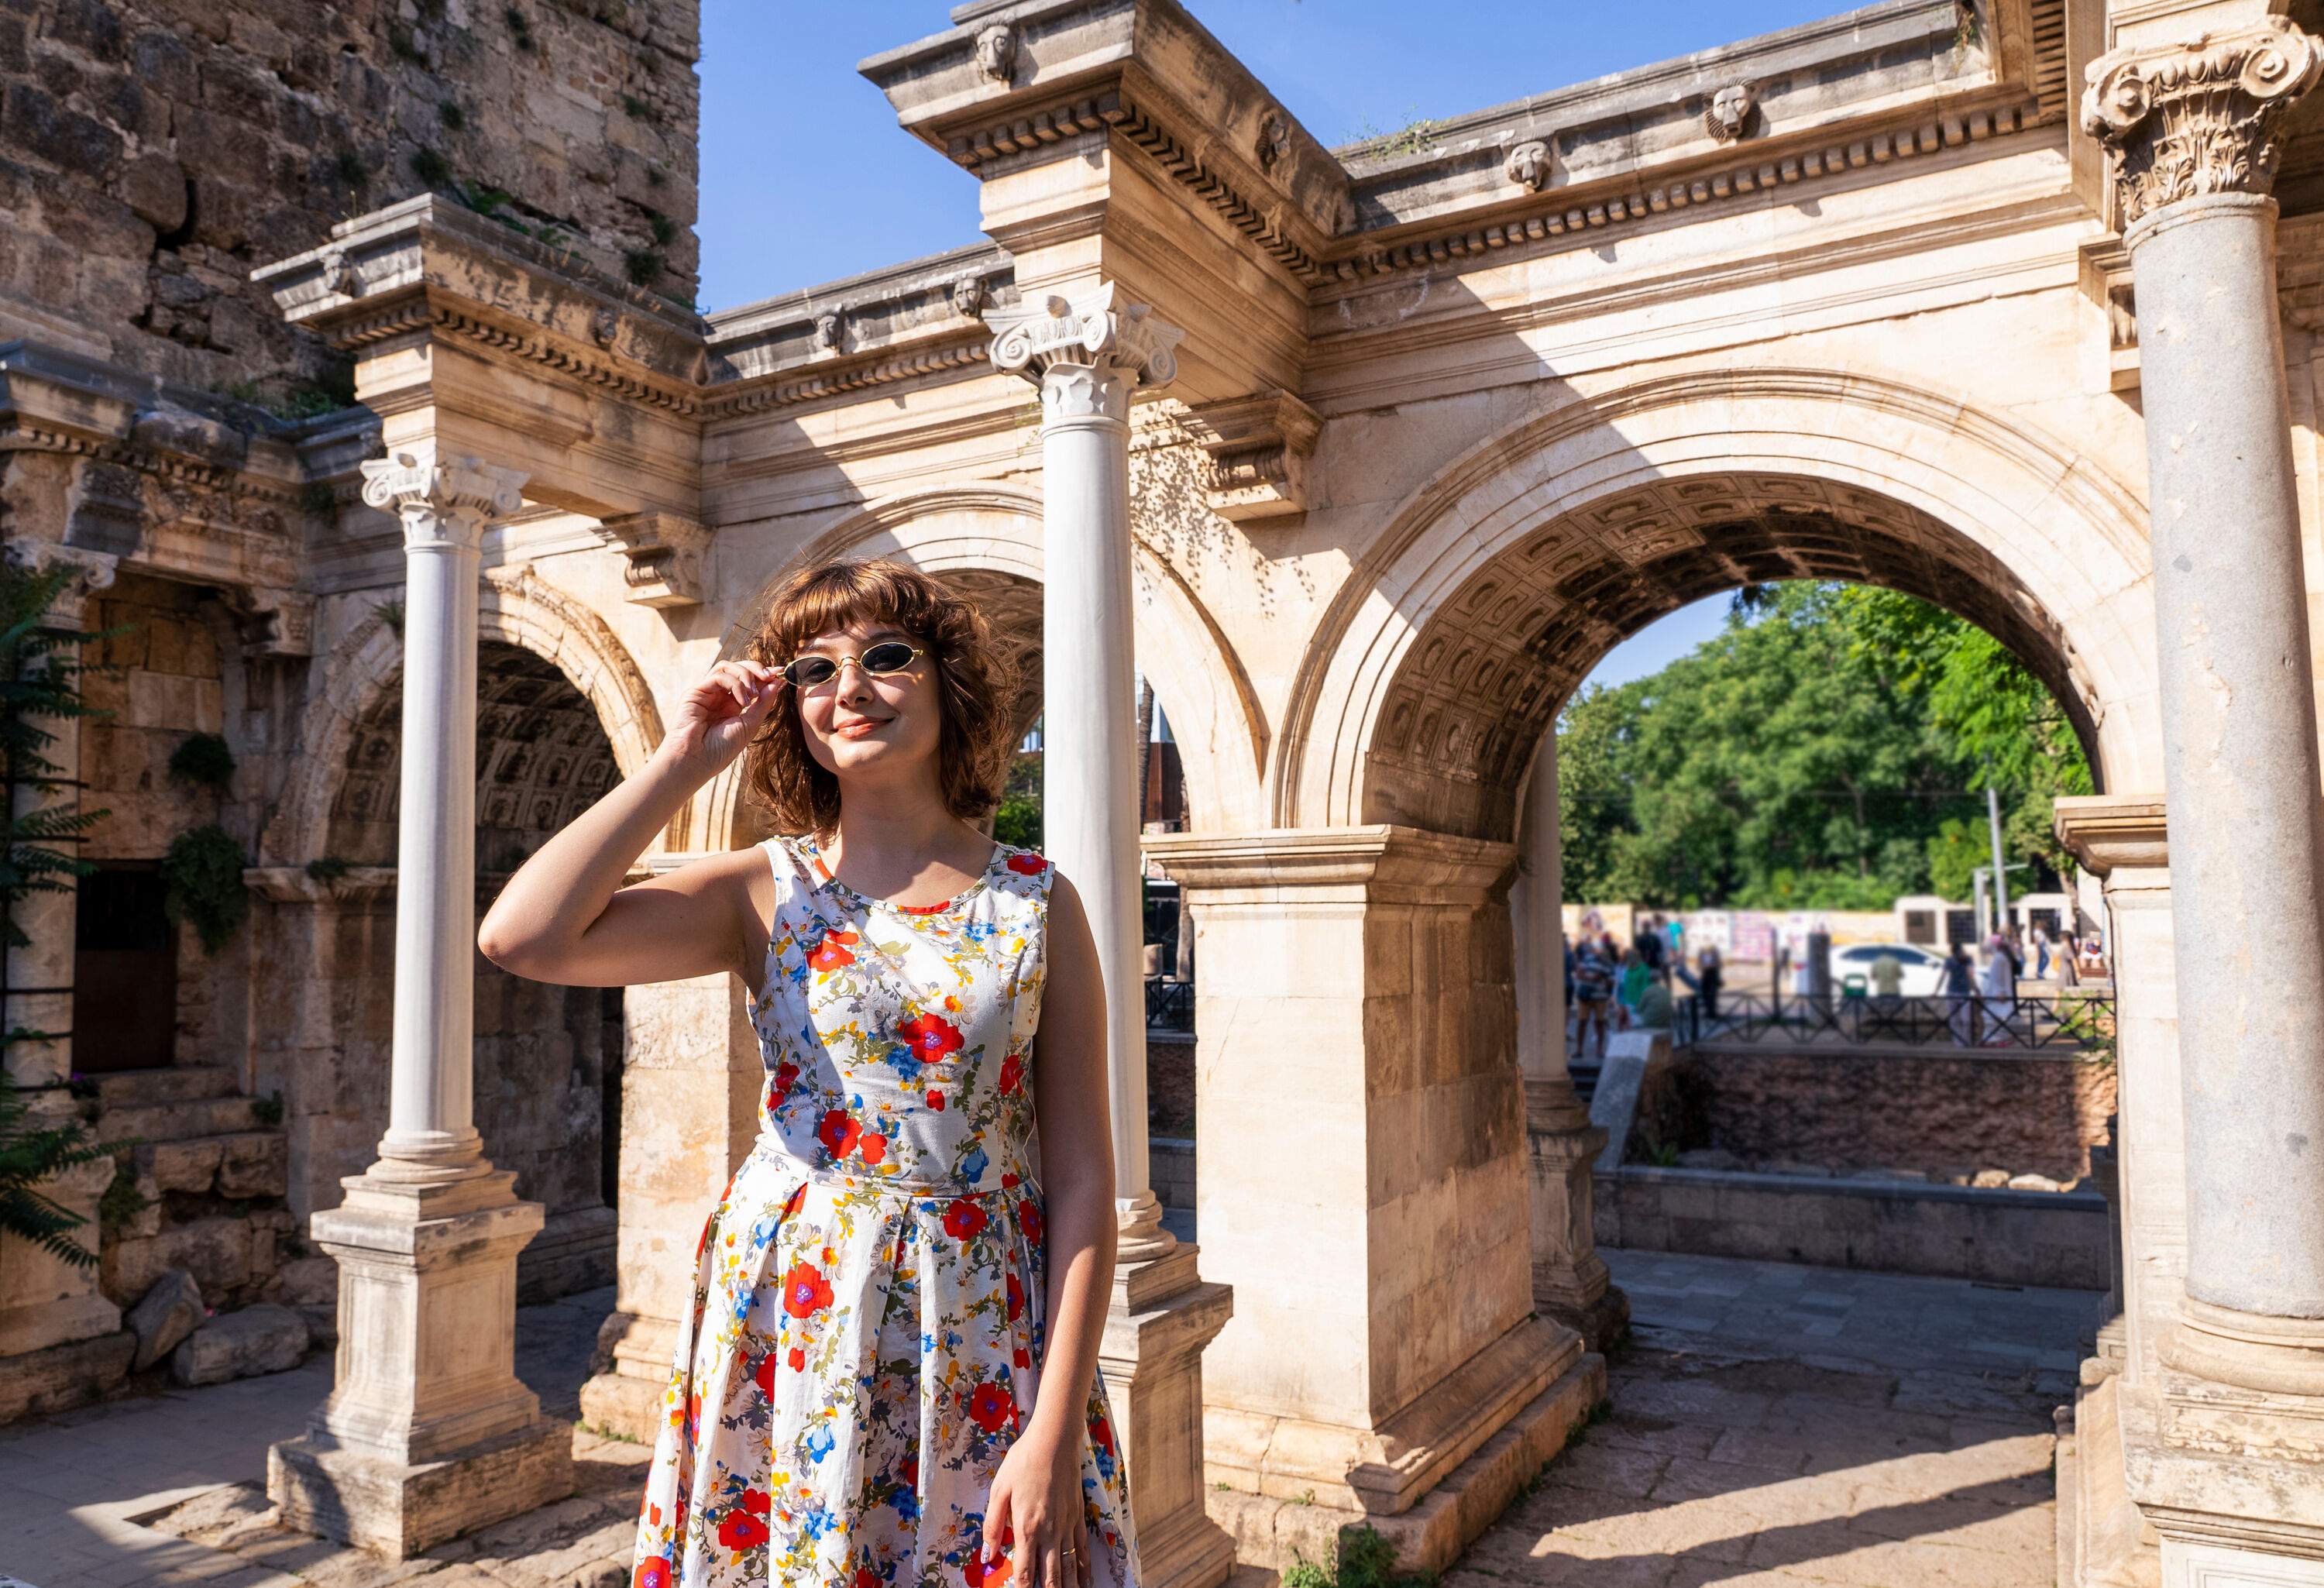 A young woman in a beautiful flowery dress strikes a pose in front of the iconic Antalya Hadrian's Gate.